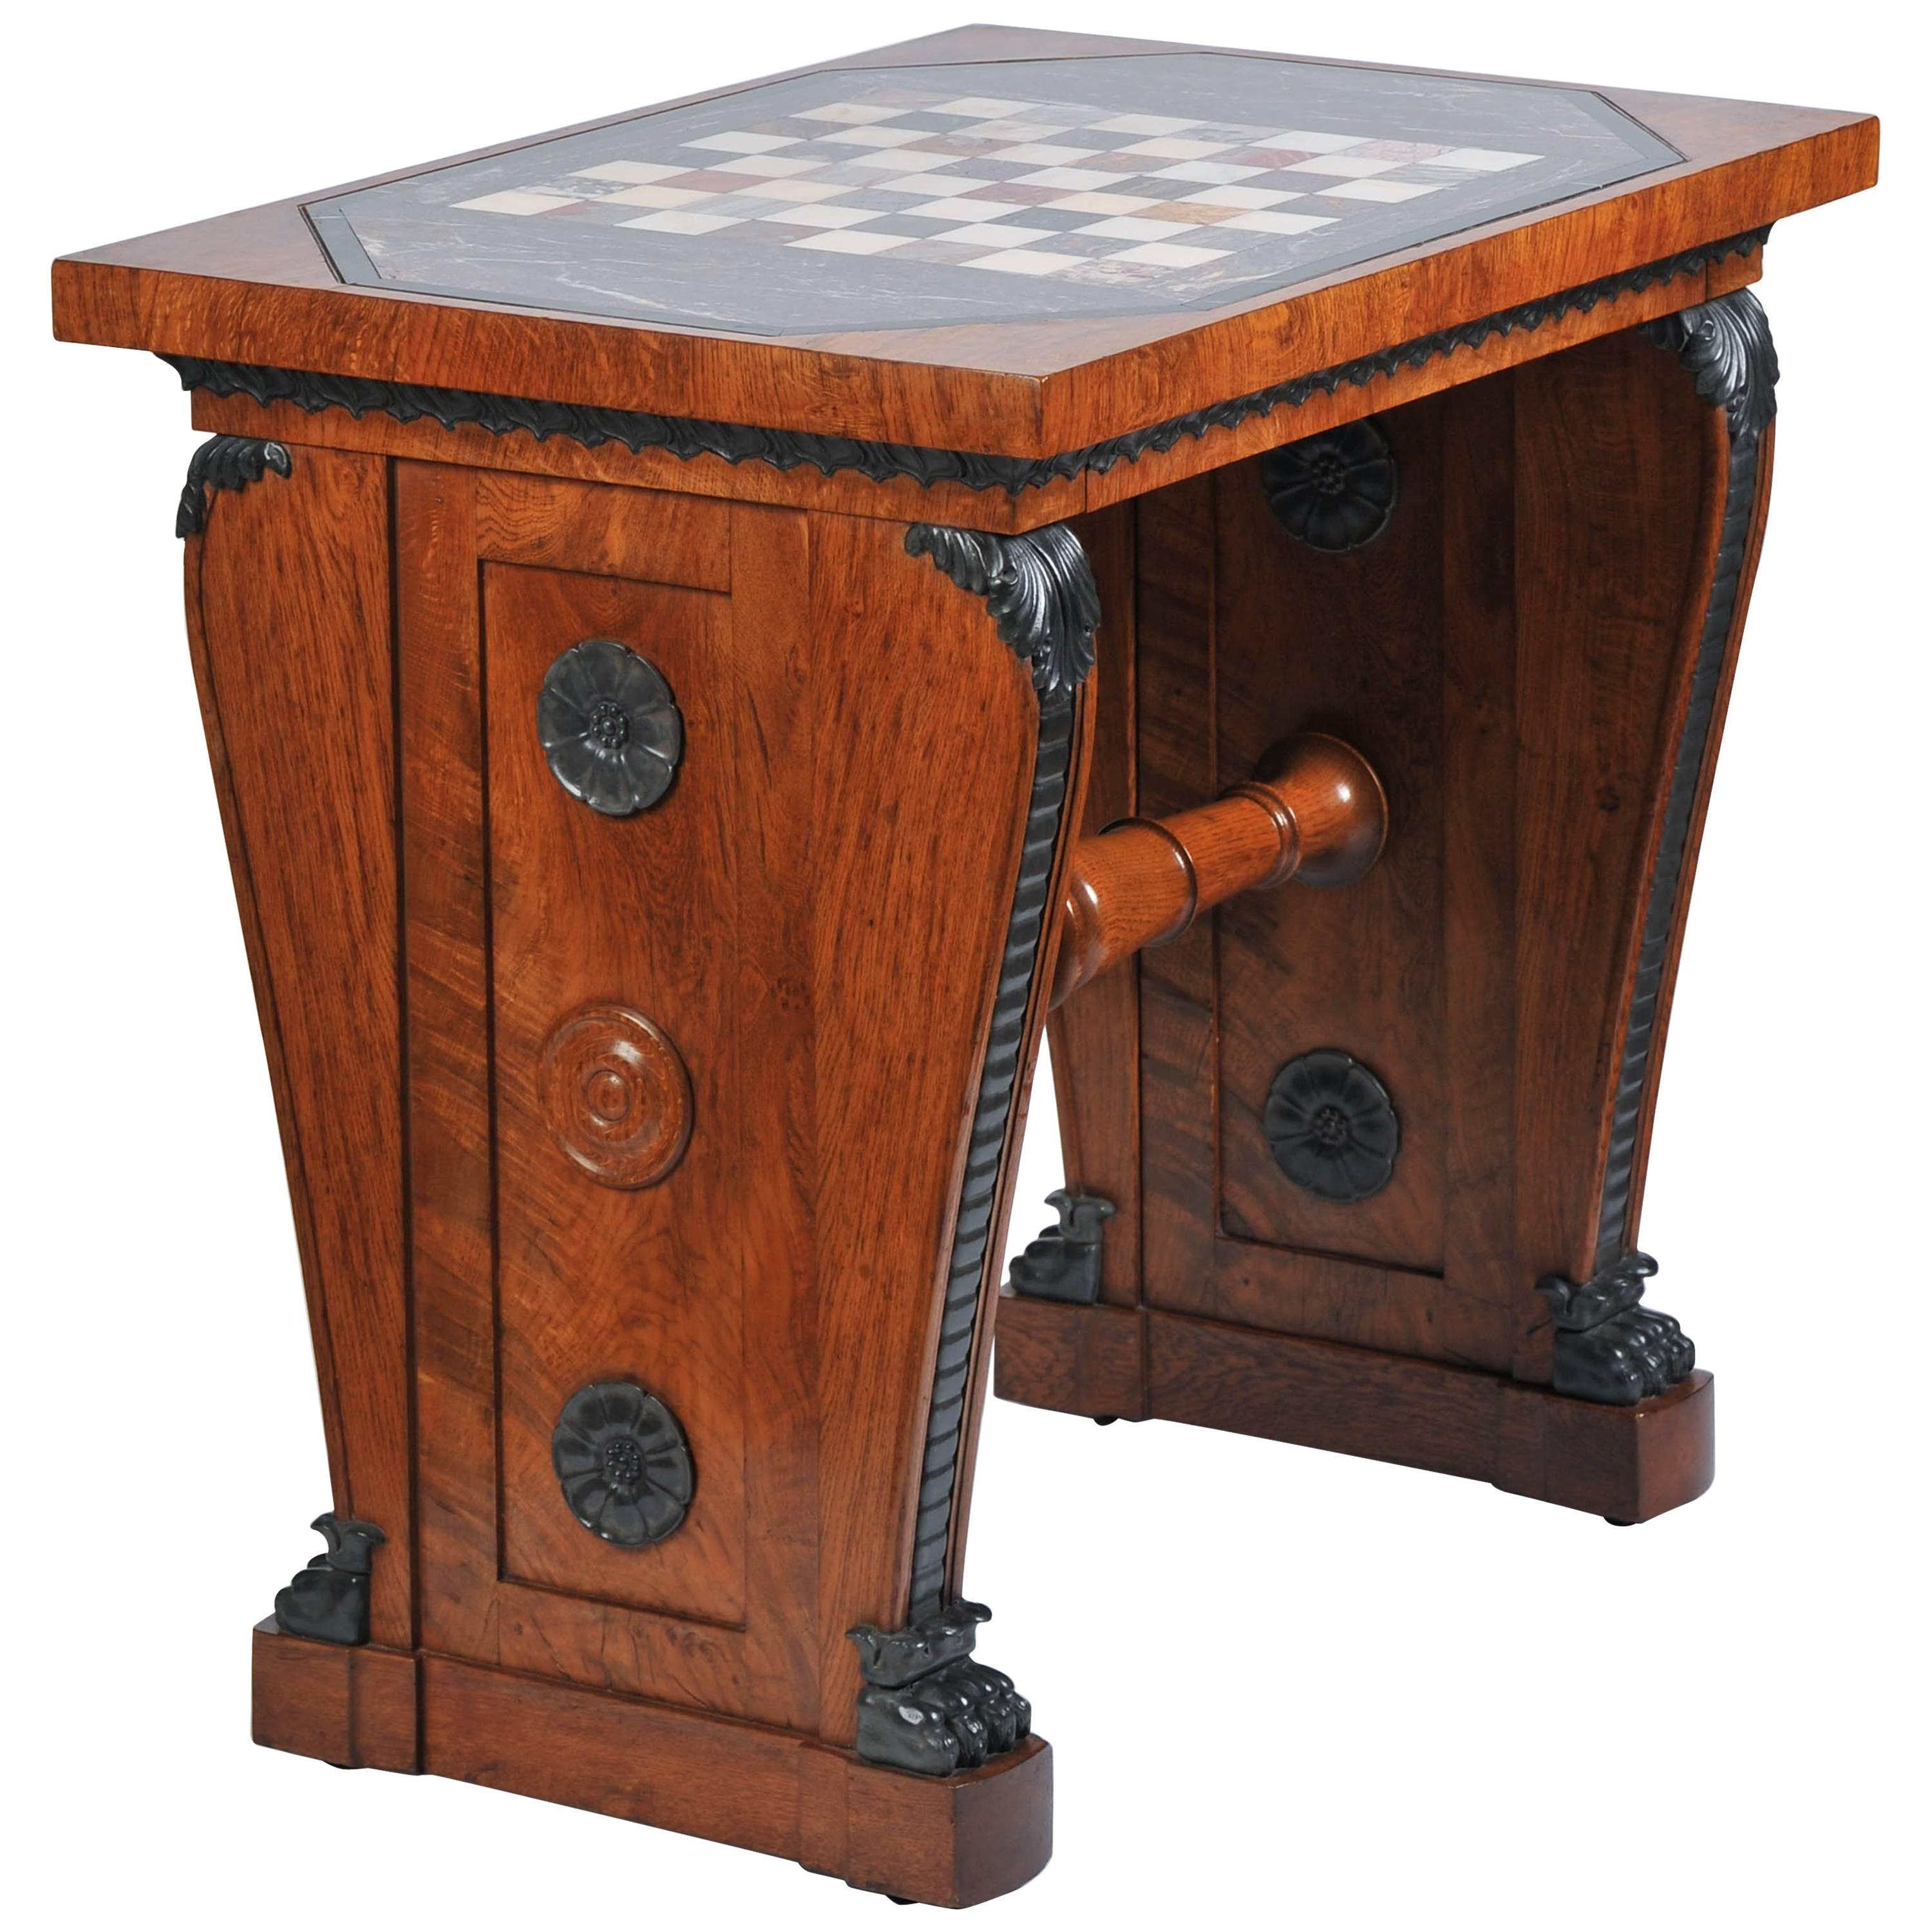 Regency Pollard Oak and Marble Chess Table by G. Bullock to Designs by T. Hope For Sale